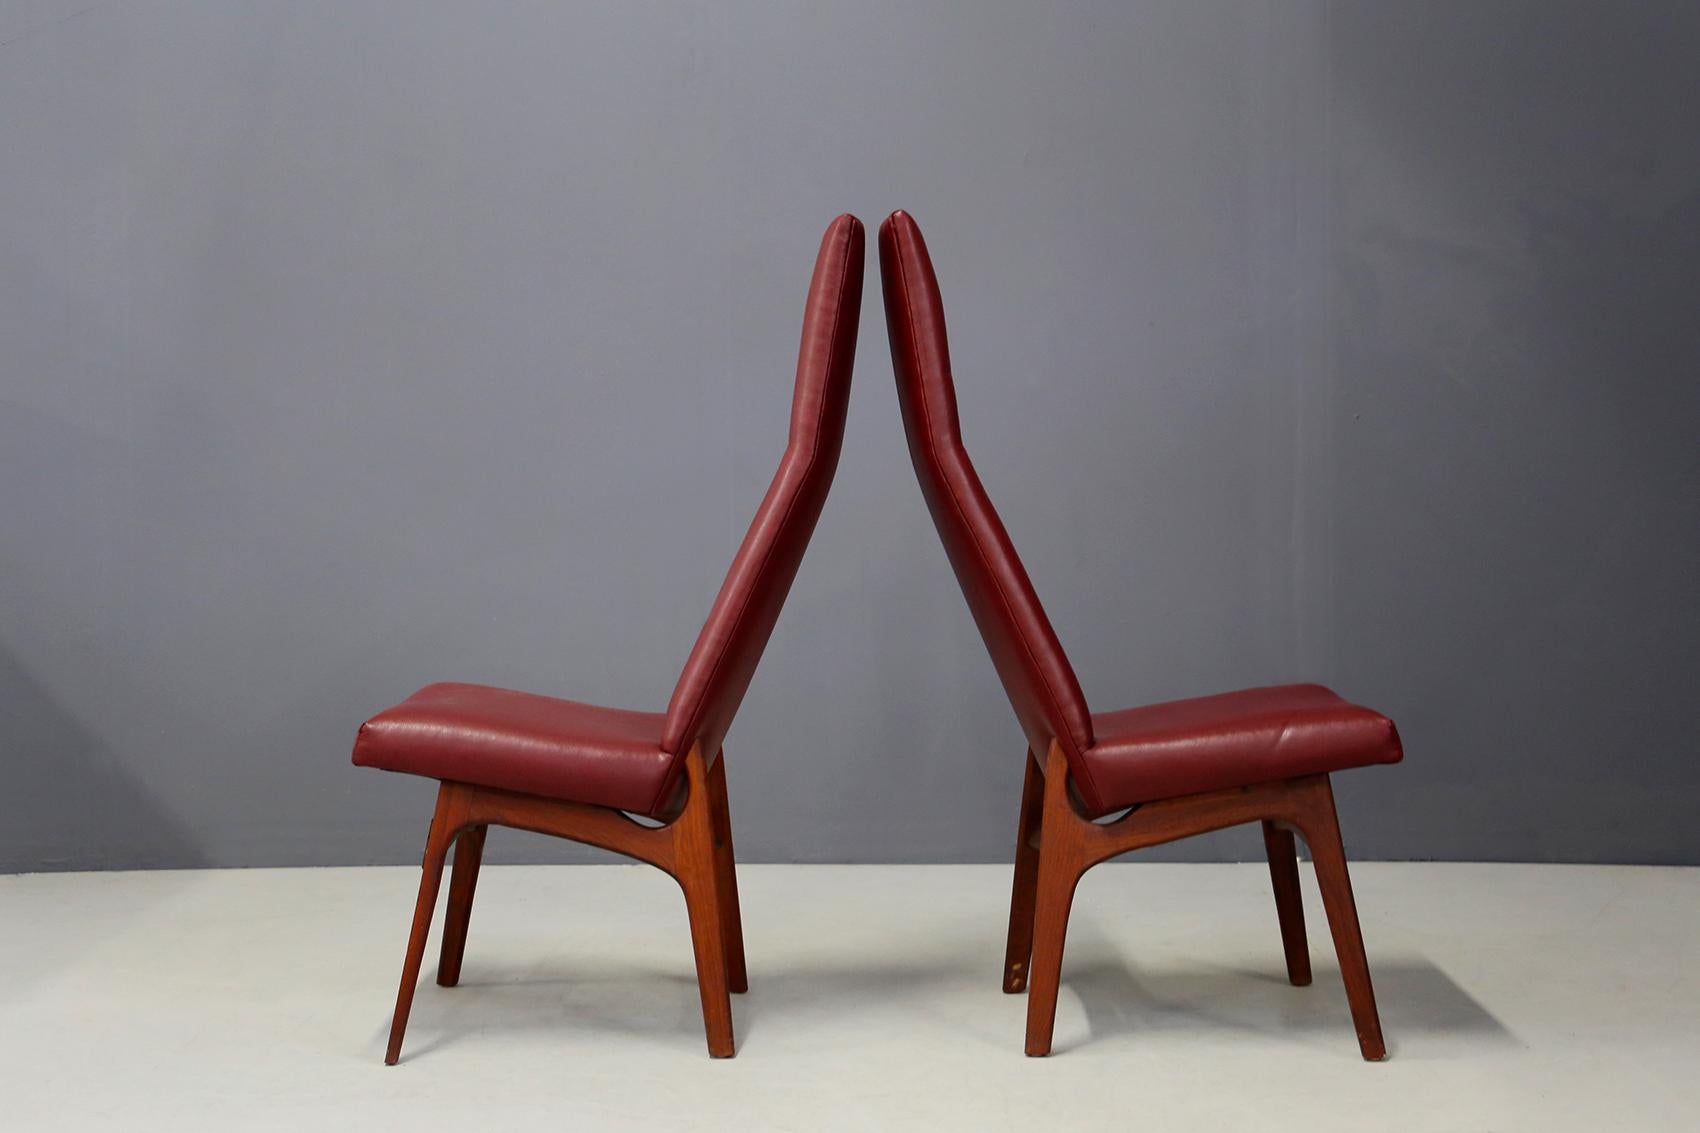 Pair of Adrian Pearsall Midcentury Dining Chairs Red for Craft Associates, 1950s 1